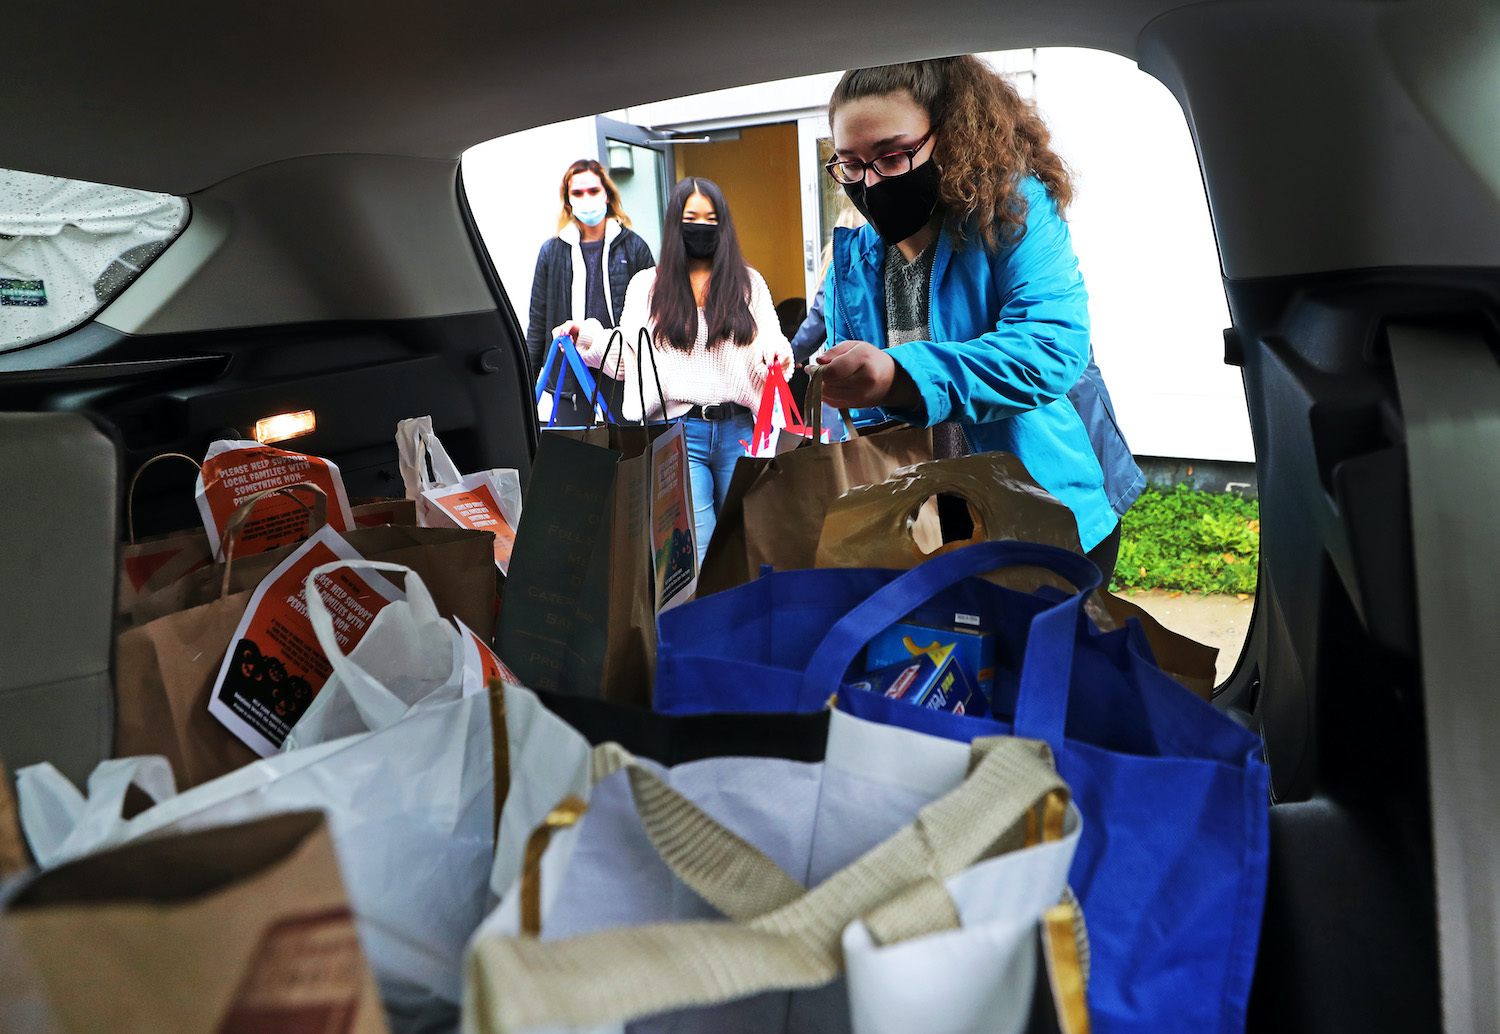 Endicott College student Grace Vartanian, right, and other students load donated food that they have collected into the back of a car for transport in Beverly, MA on Oct. 29, 2020. September 2021